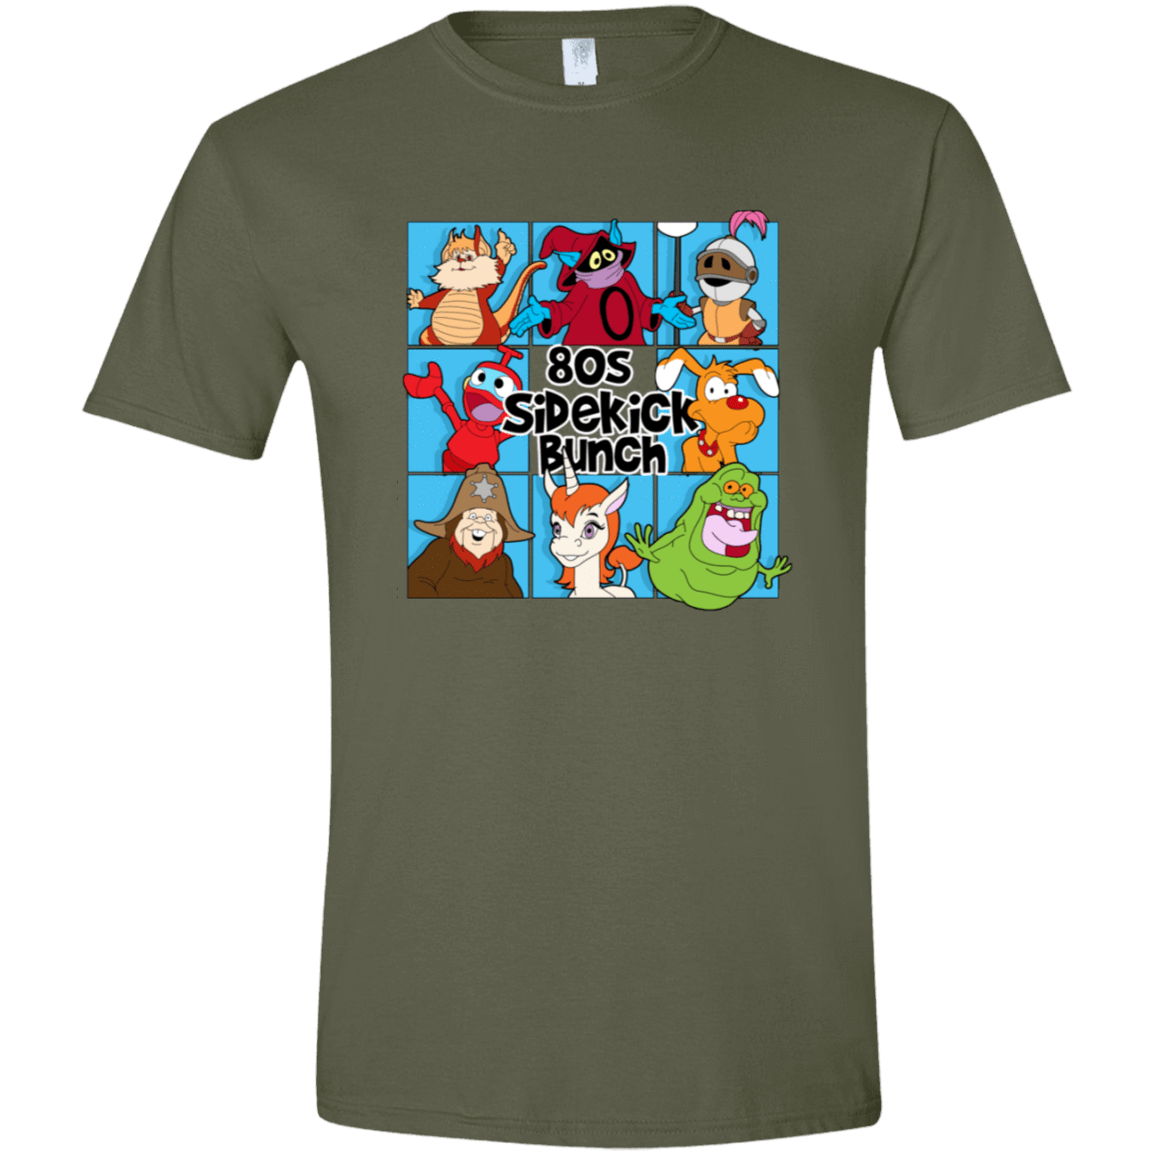 T-Shirts Military Green / S 80s Sidekick Bunch Men's Semi-Fitted Softstyle